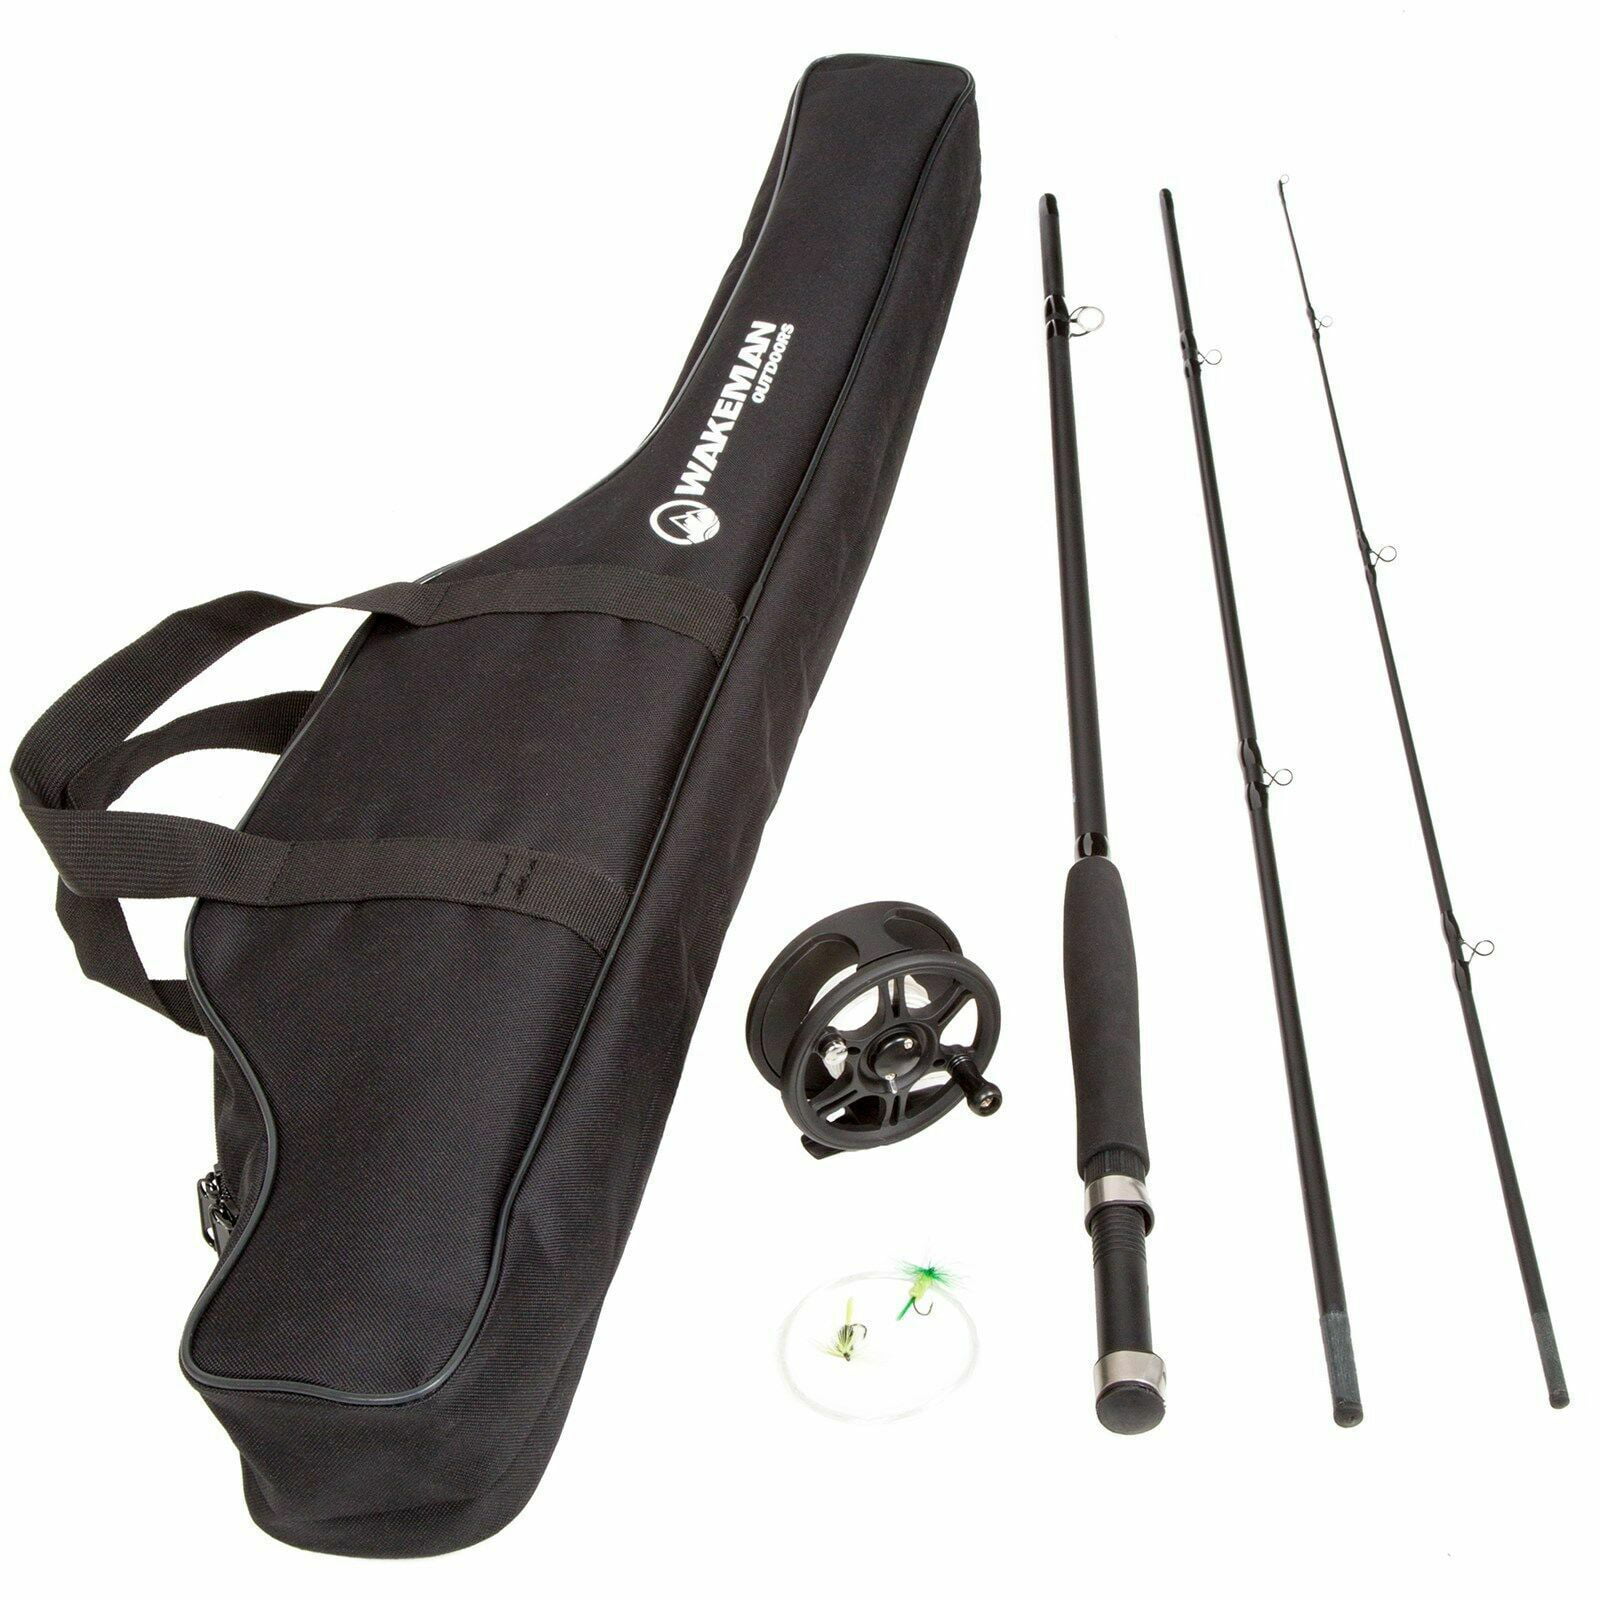 Details about   Fishing Fly Rod and Reel Combo With Carrying Case 3 Piece 8 Feet Long Full Set 